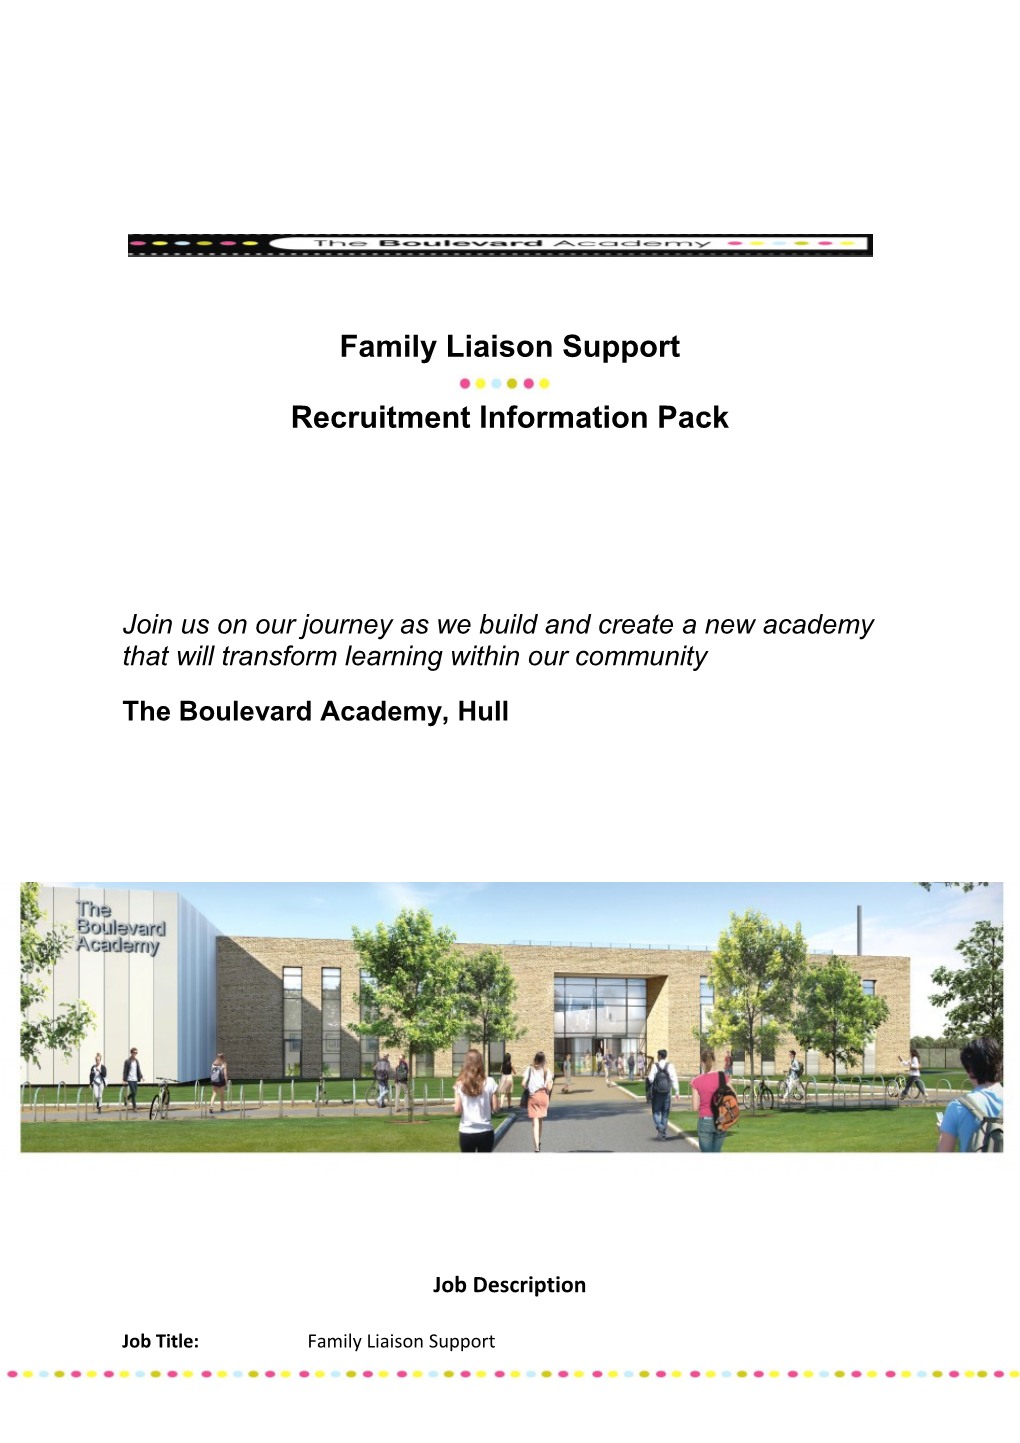 Family Liaison Support